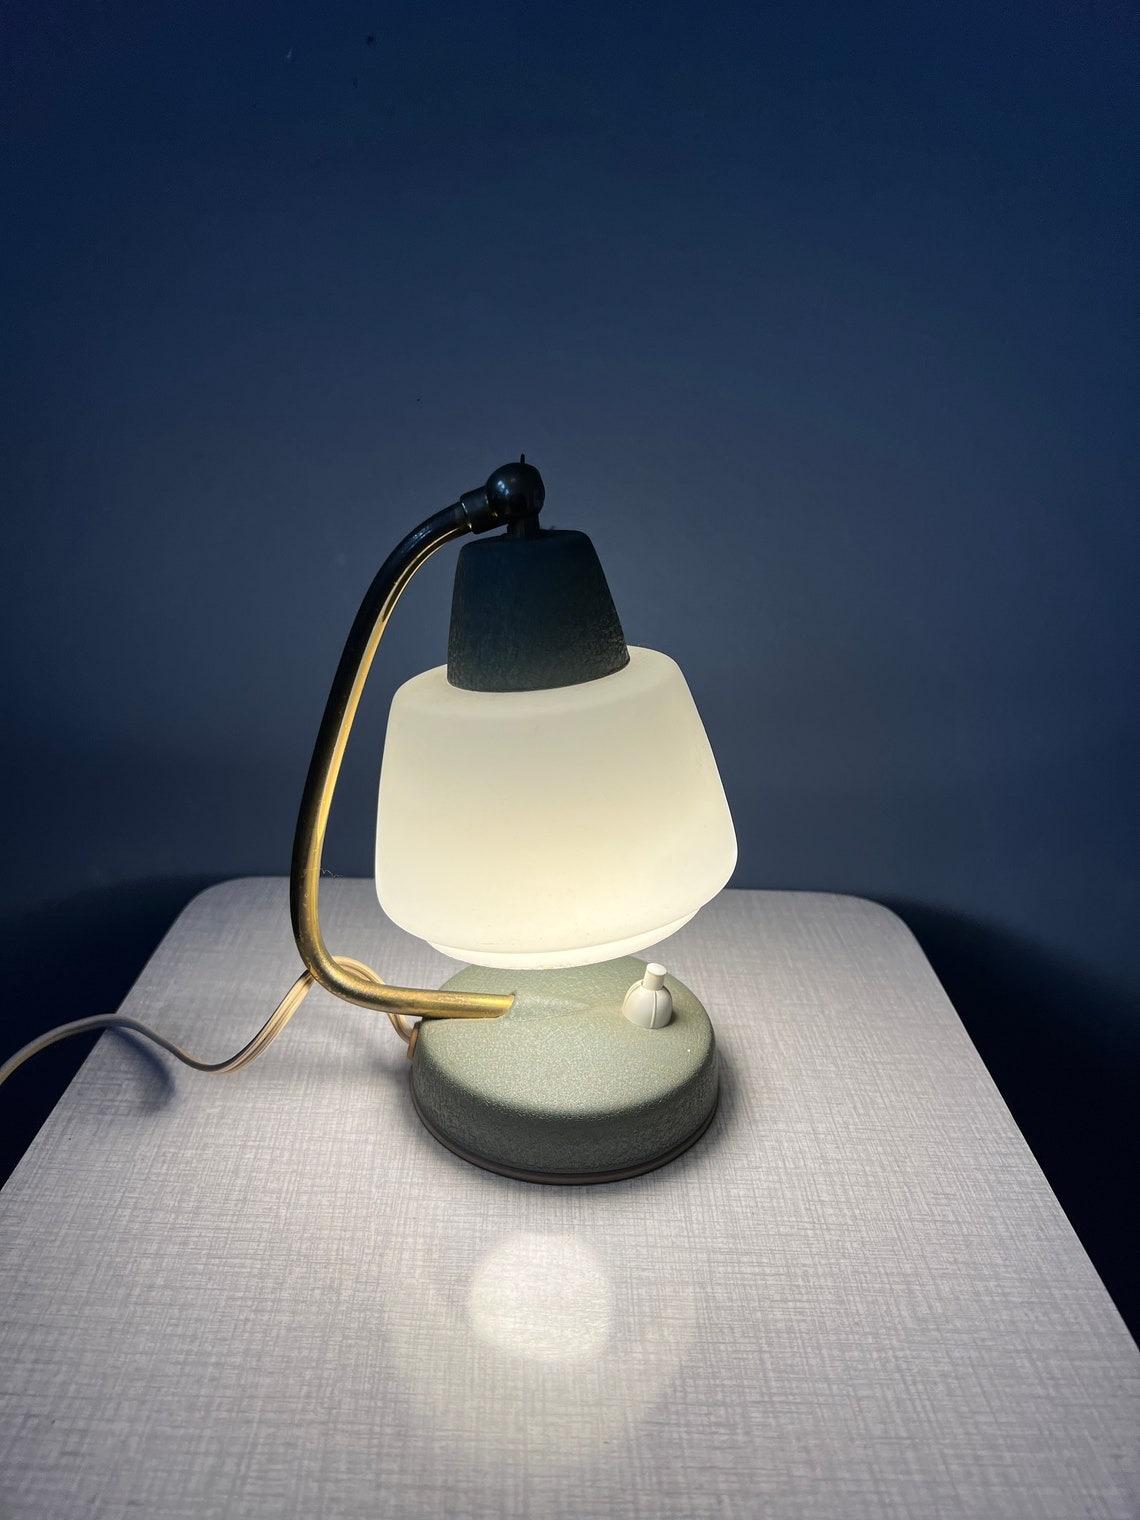 Small vintage mid century bedside table lamp with glass shade. The position of the shade can easily be adjusted, see pictures. The lamp requires an E14 lightbulb and currently has an EU-plug.

Additional information:
Materials: Glass, metal
Period: